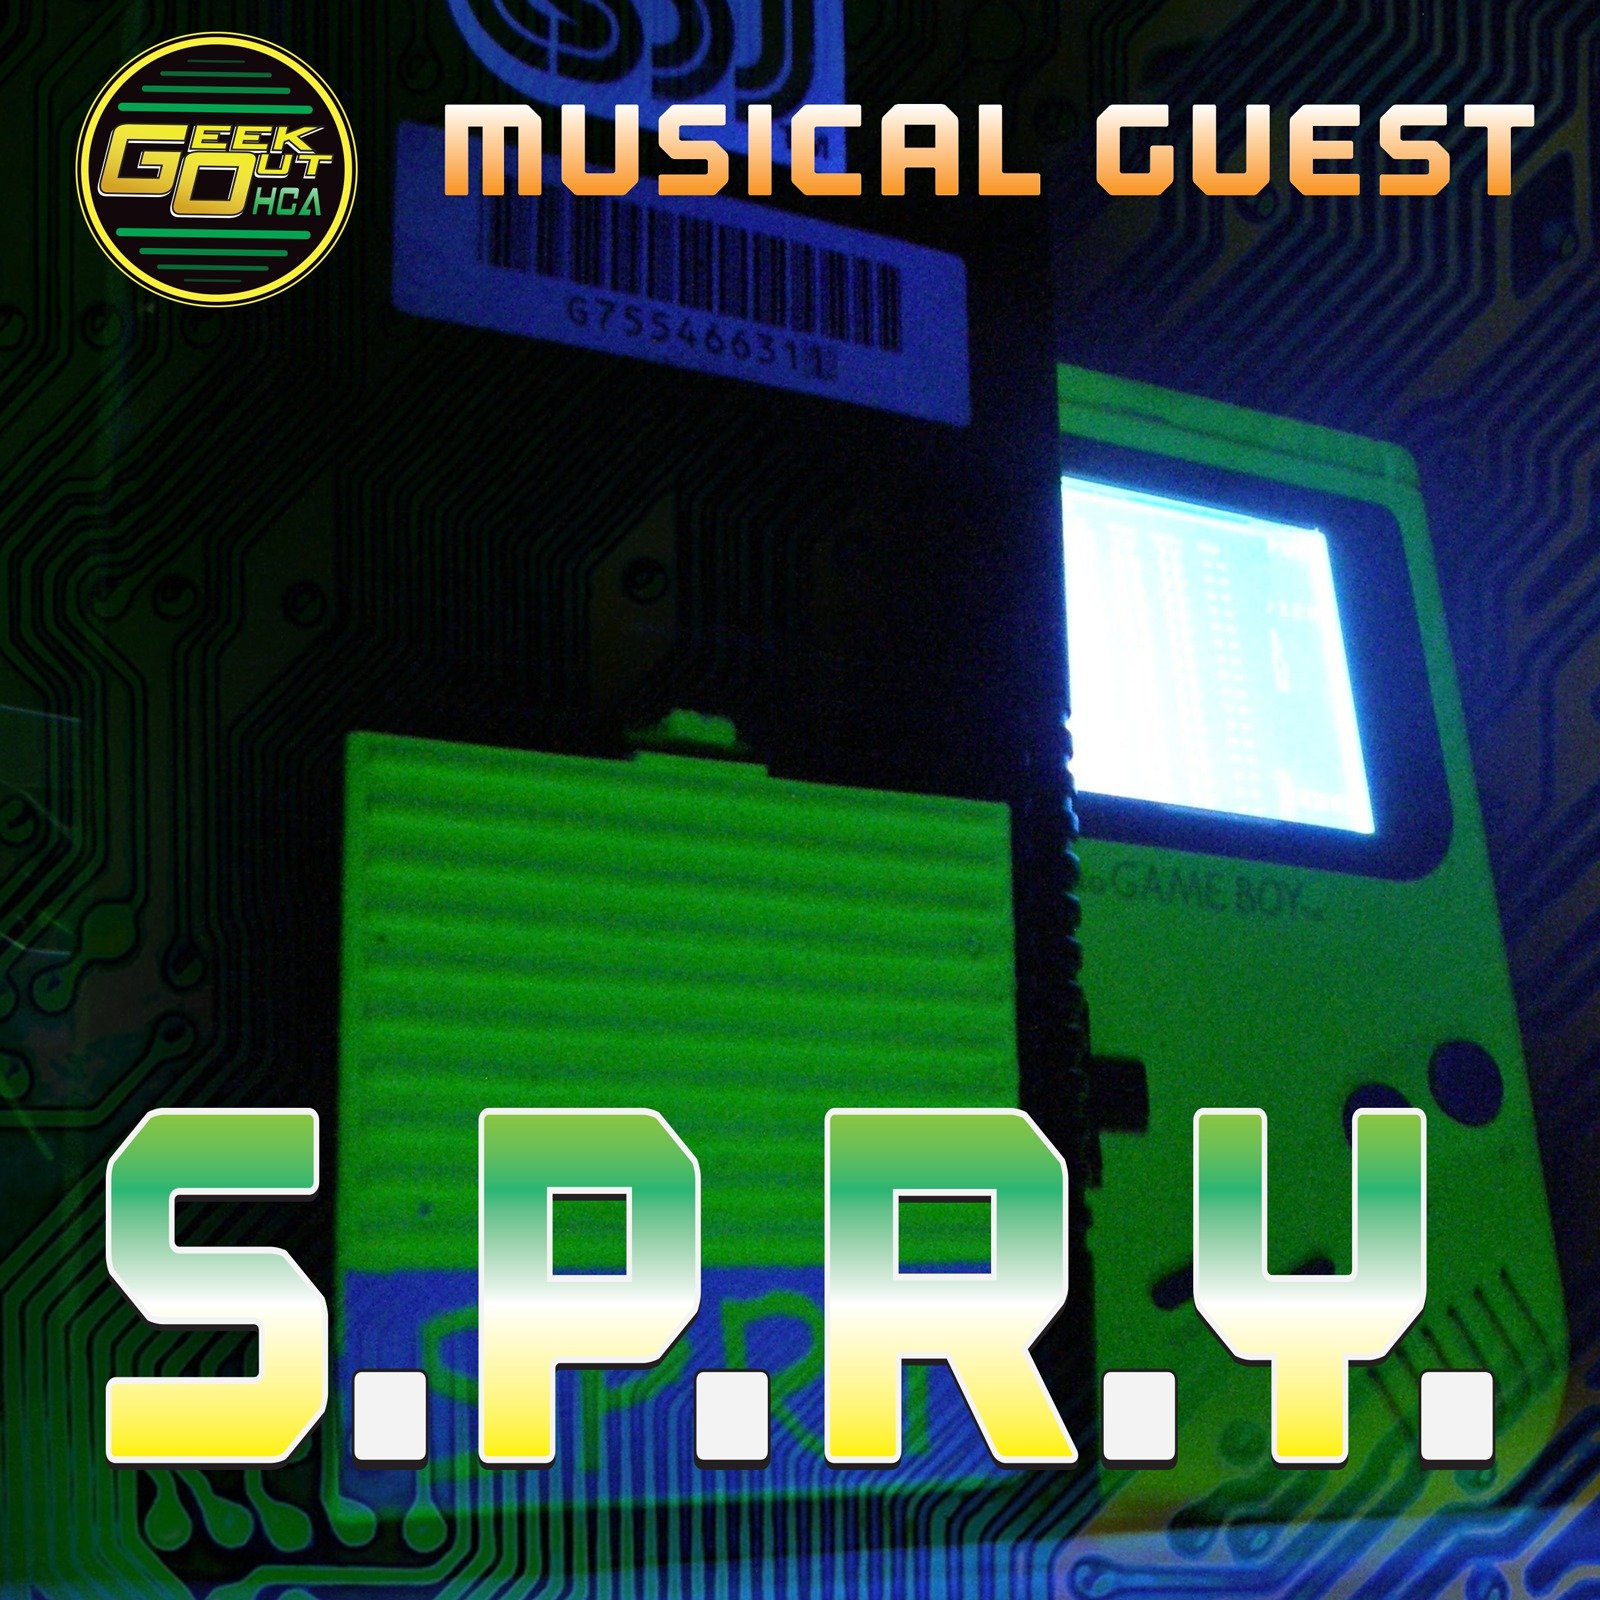   MUSICAL GUEST ANNOUNCEMENT    We're so Geeked to be having S.P.R.Y., a long time Cincinnati musician and musical guest for our show, joining us again this year! Things will be running a little differently for his set an wonderful How to Make Chiptu